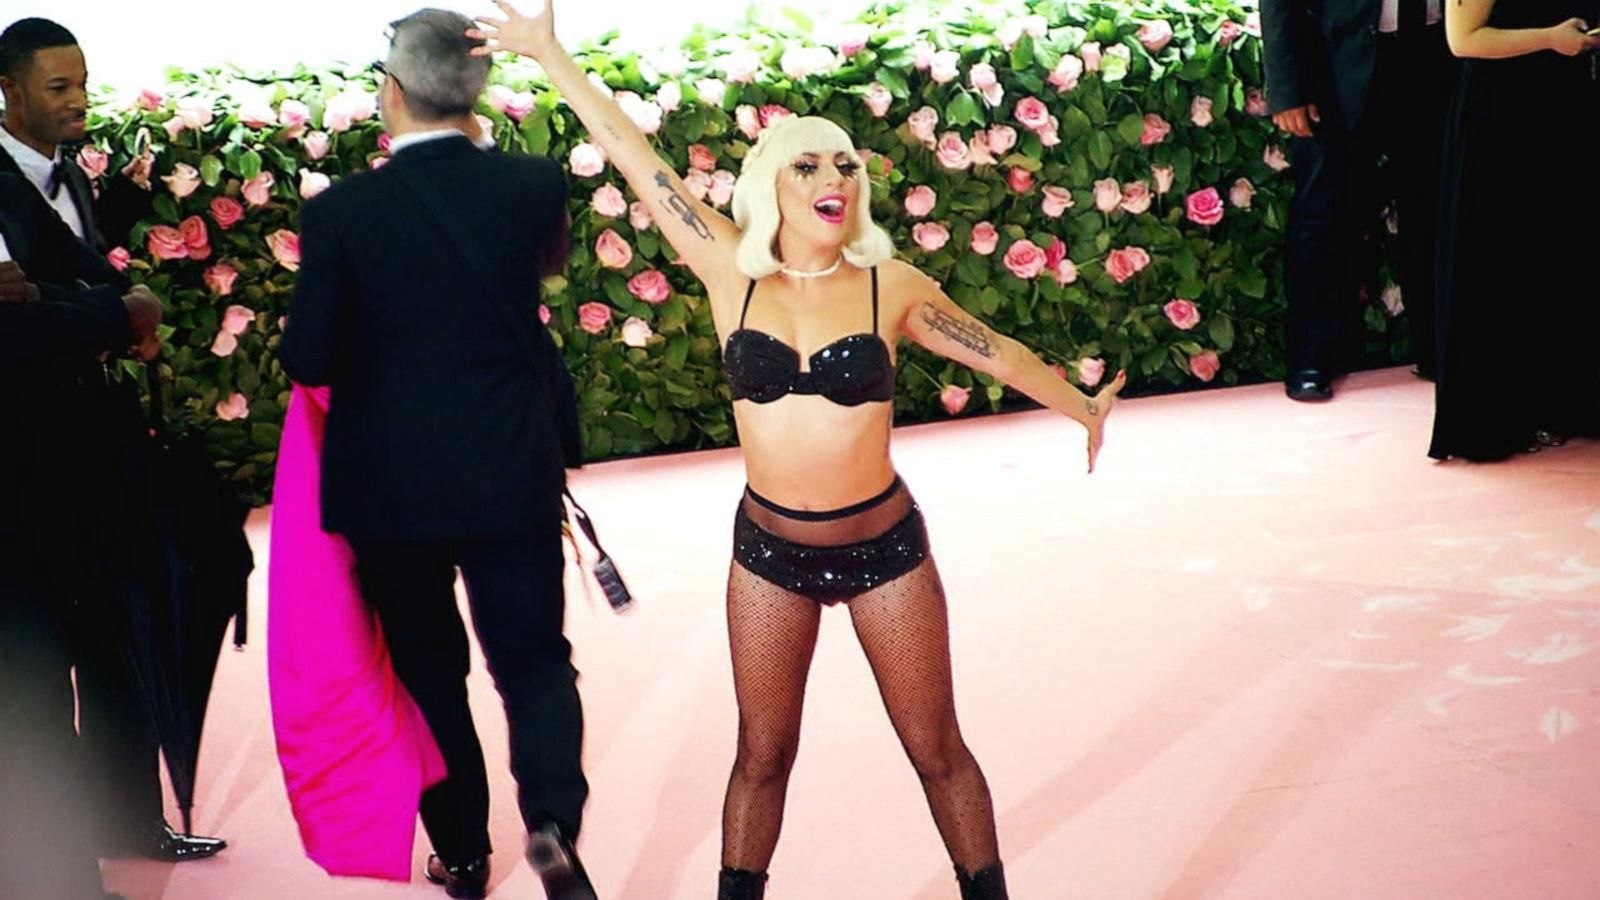 VIDEO: Stars take the camp theme to extremes at Met Gala